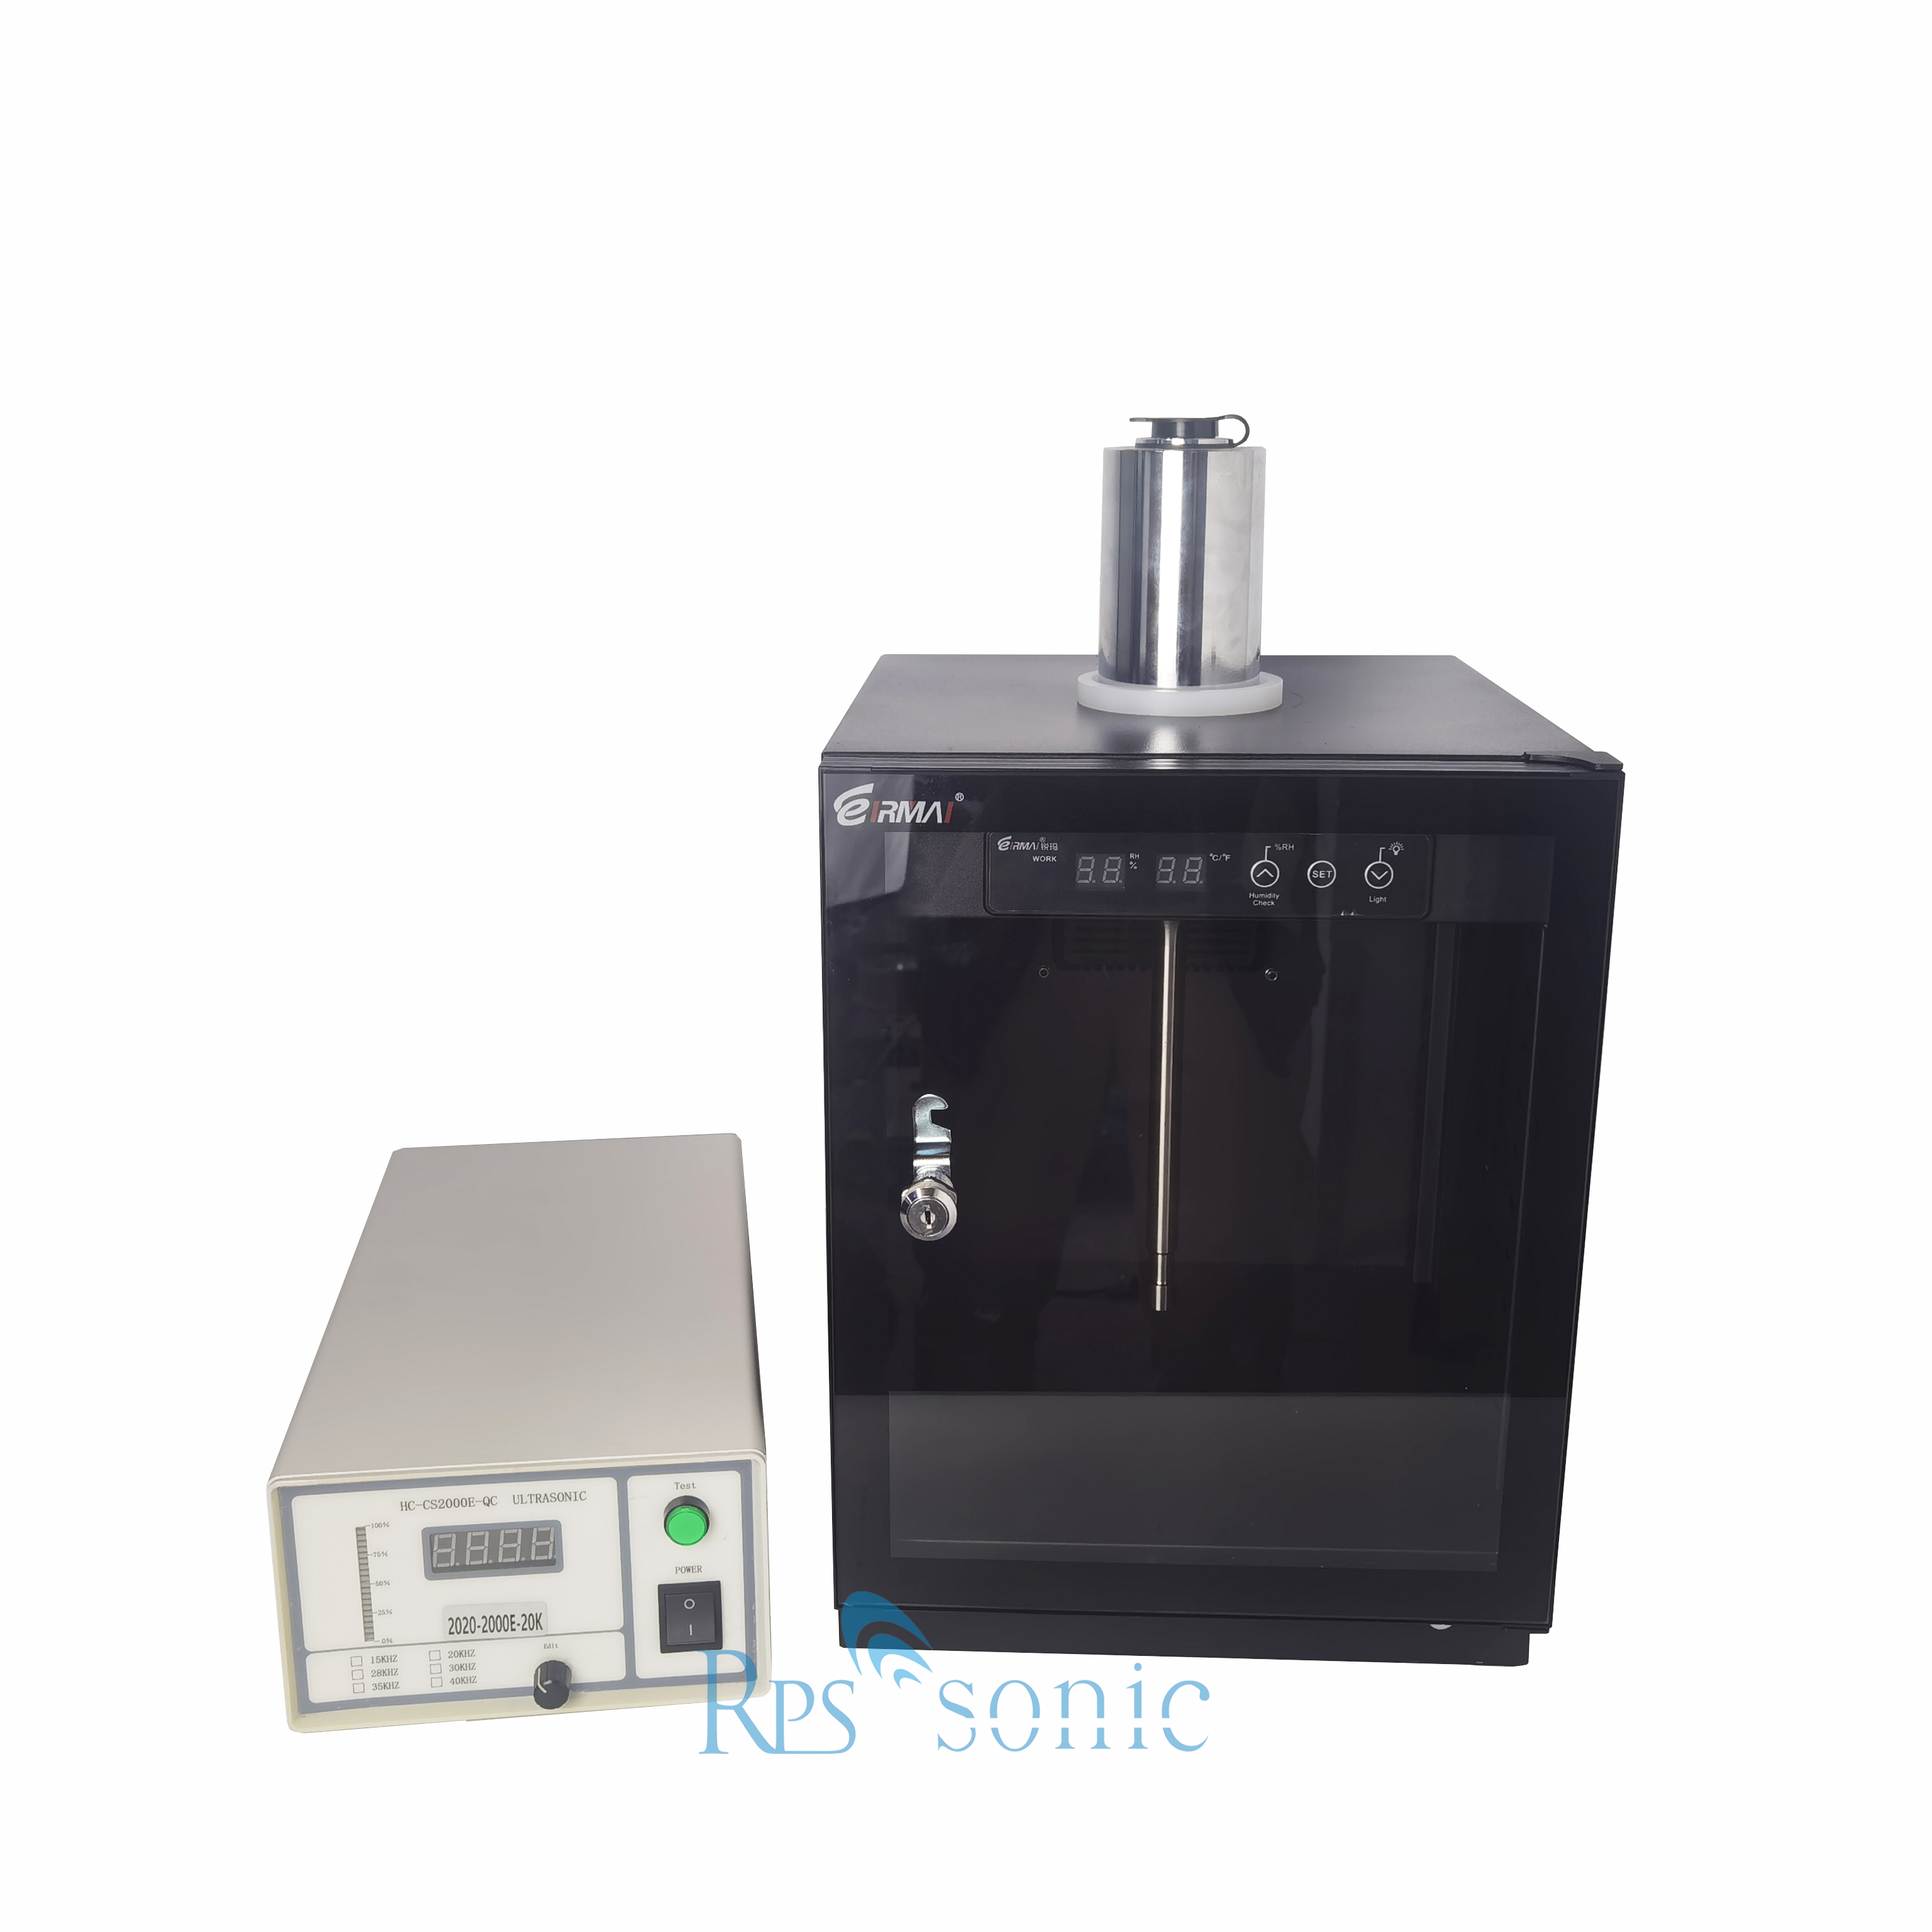 20Khz 1000w Ultrasonic laboratory sonicator with Sound Enclosure for extracting Featured Image